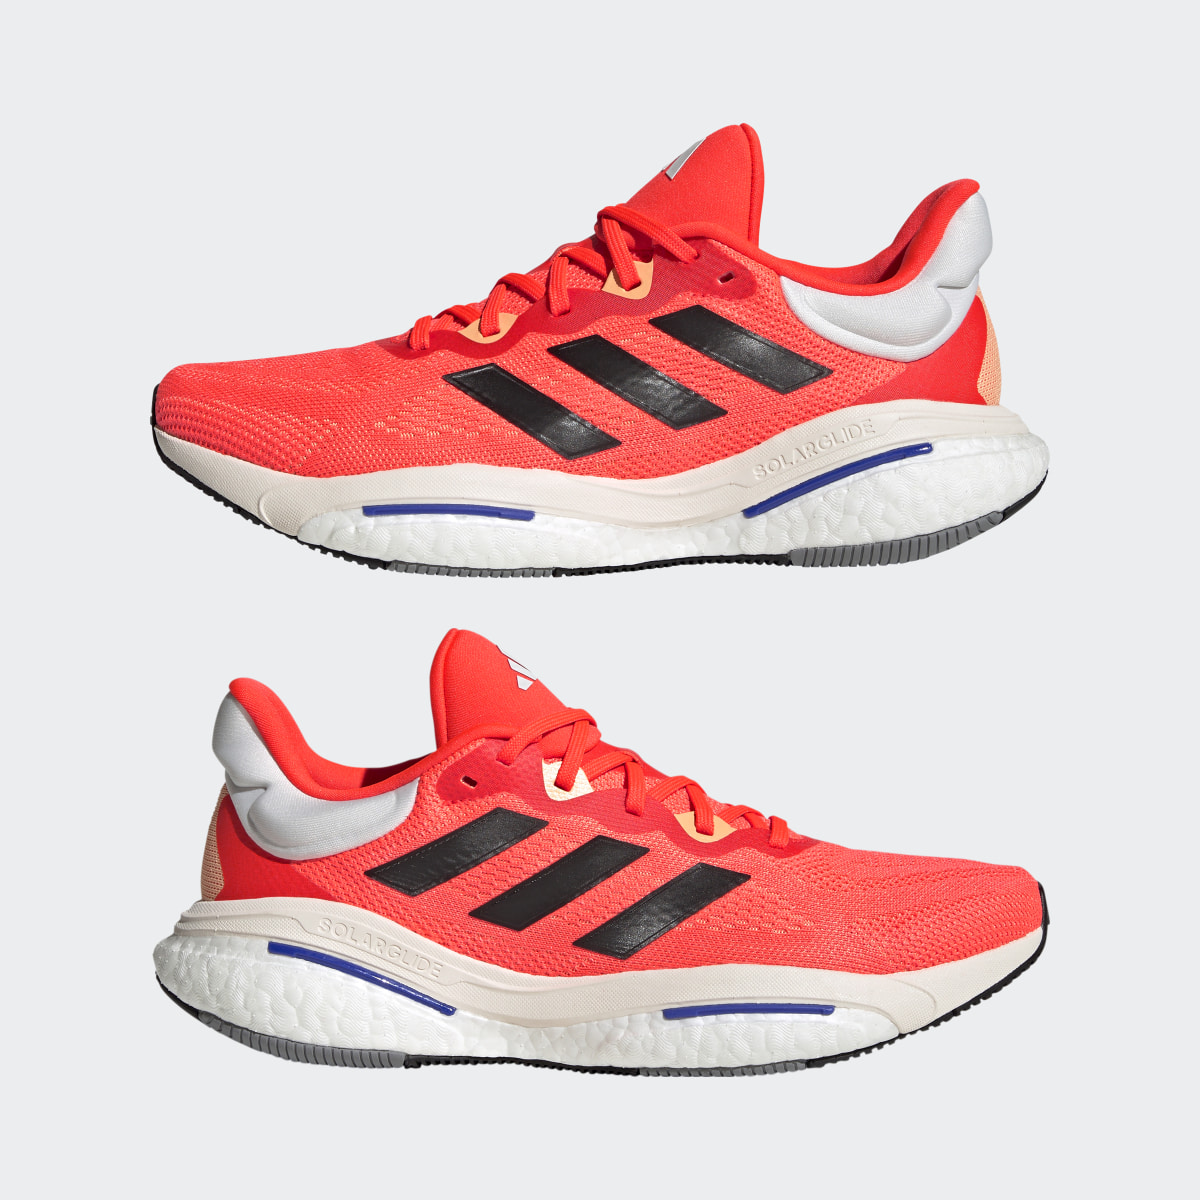 Adidas SOLARGLIDE 6 Shoes. 8